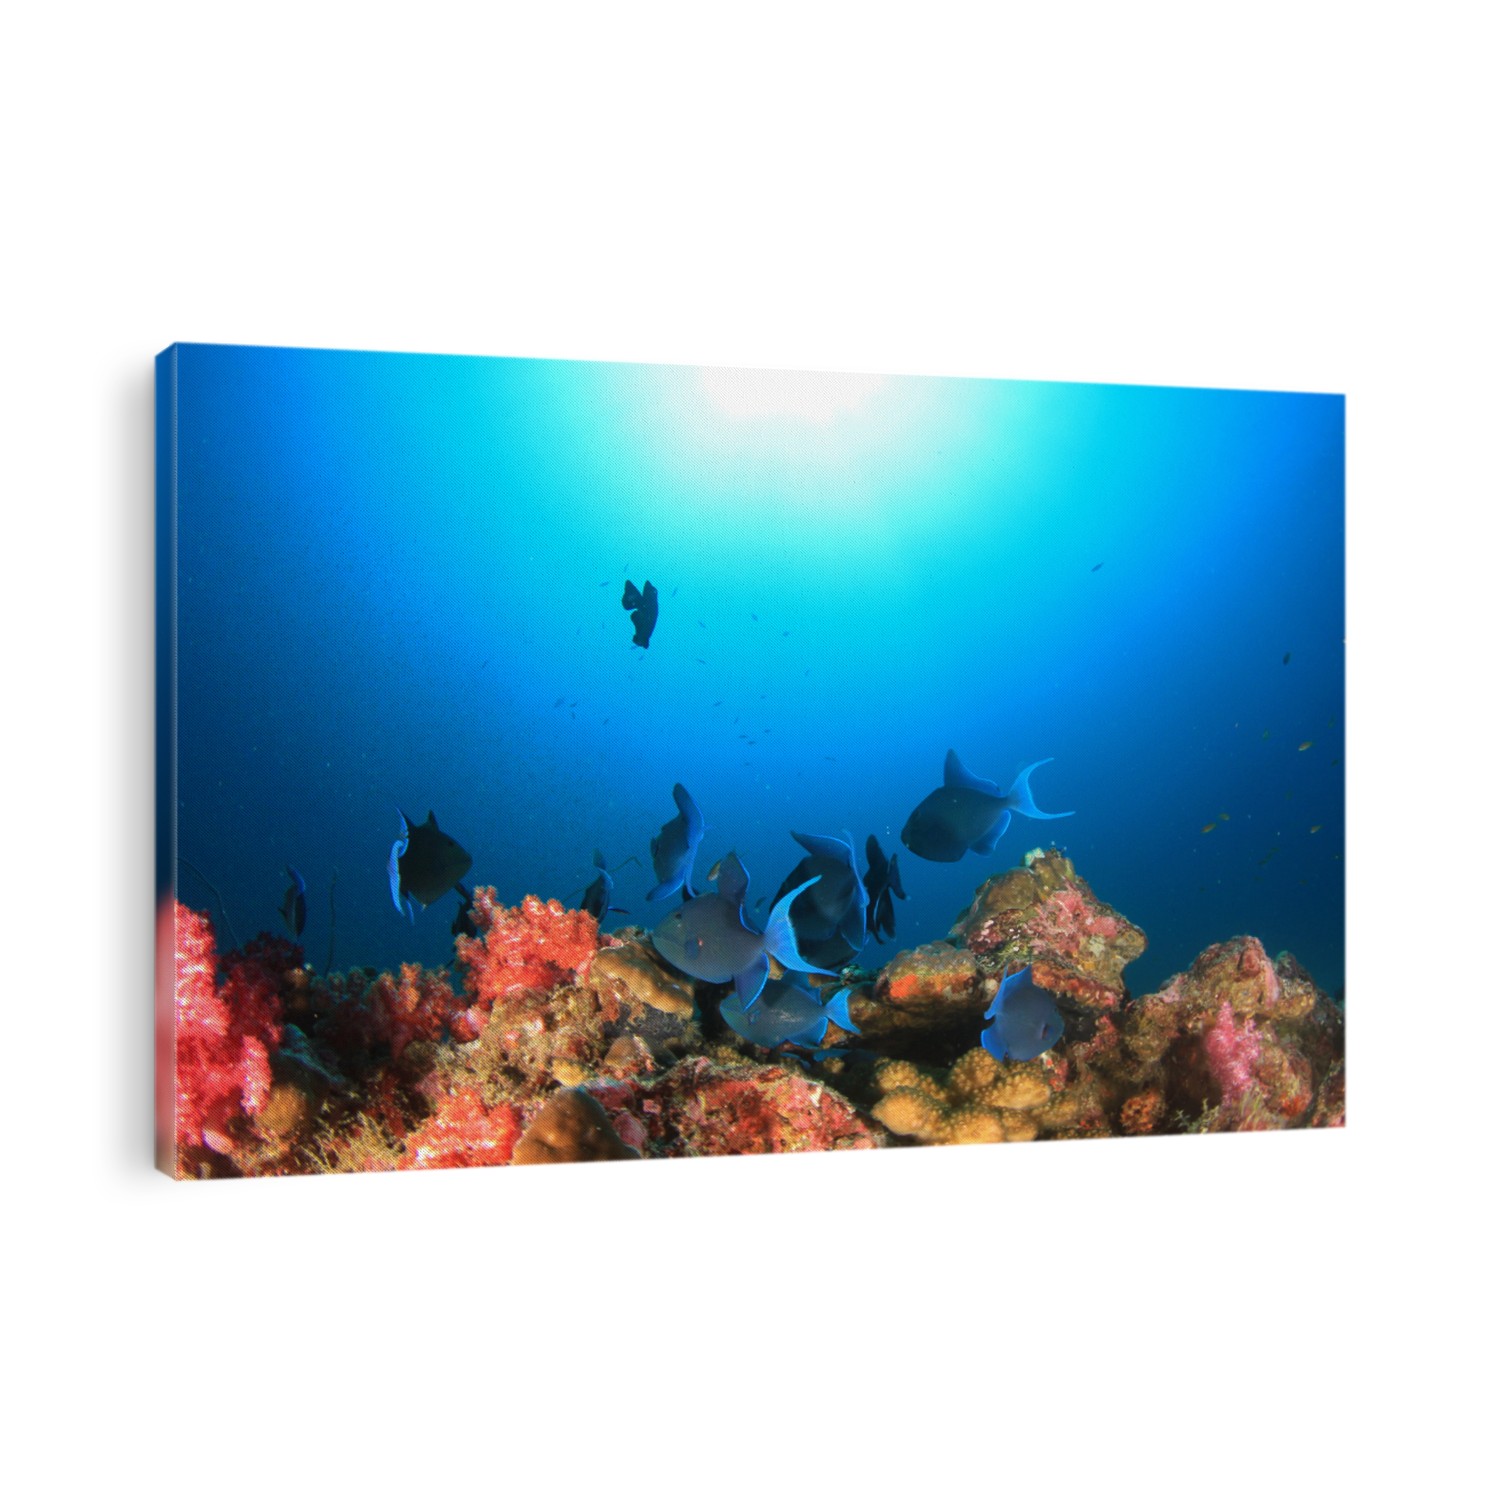 Redtooth Triggerfish and coral reef underwater